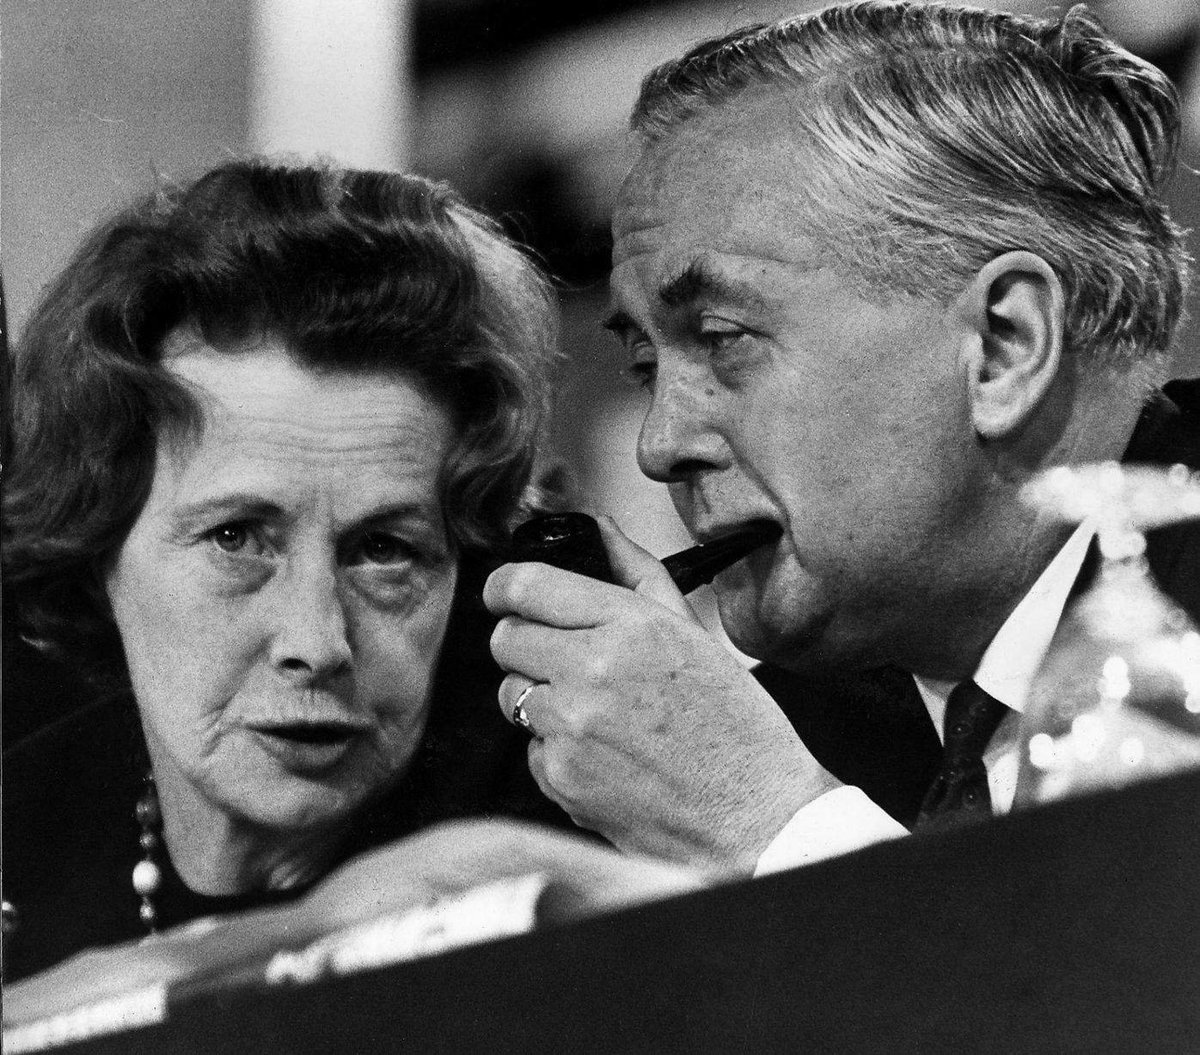 Harold Wilson later recalled how Castle 'worked all hours of the night' to settle the dispute, building a relationship with the machinists. She promised them she would one day bring about equal pay legislation